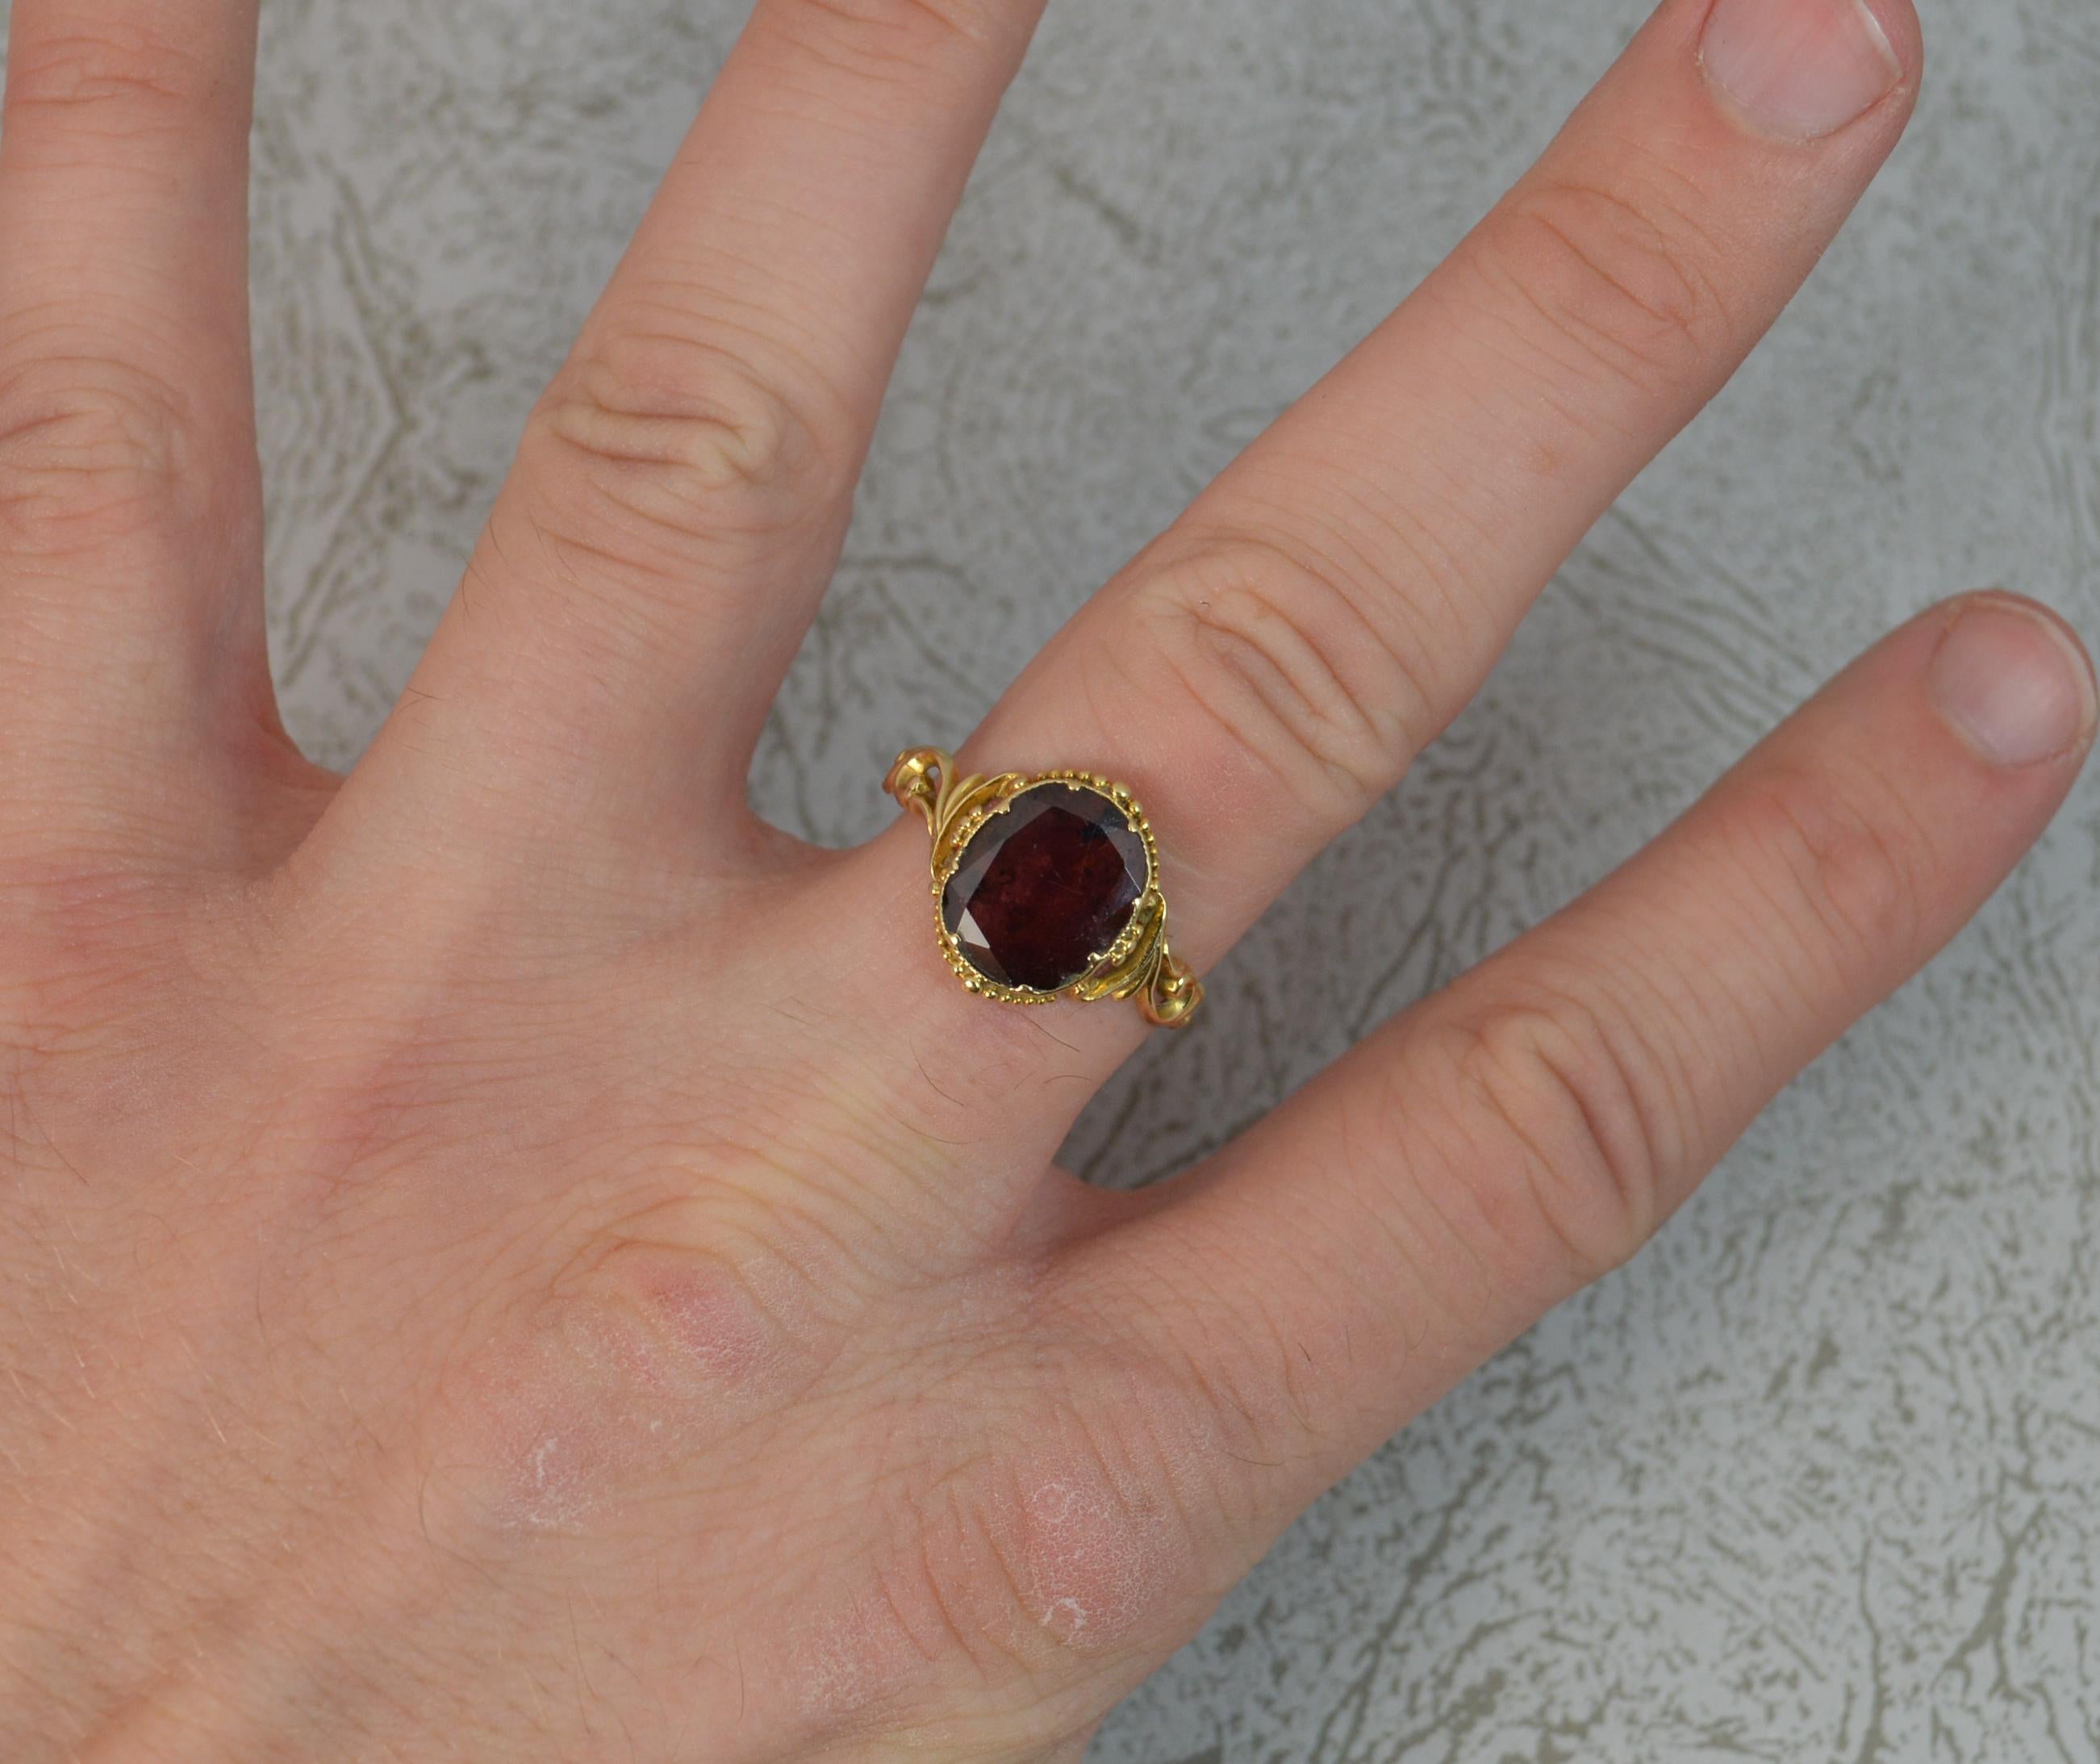 A superb early Victorian period ring, c1840/50.
Solid 18 carat yellow gold example.
Designed with a single oval shaped, flat cut garnet in closed foiled back setting with fine bead design surrounding.
9mm x 11mm approx.

CONDITION ; Very good. Well